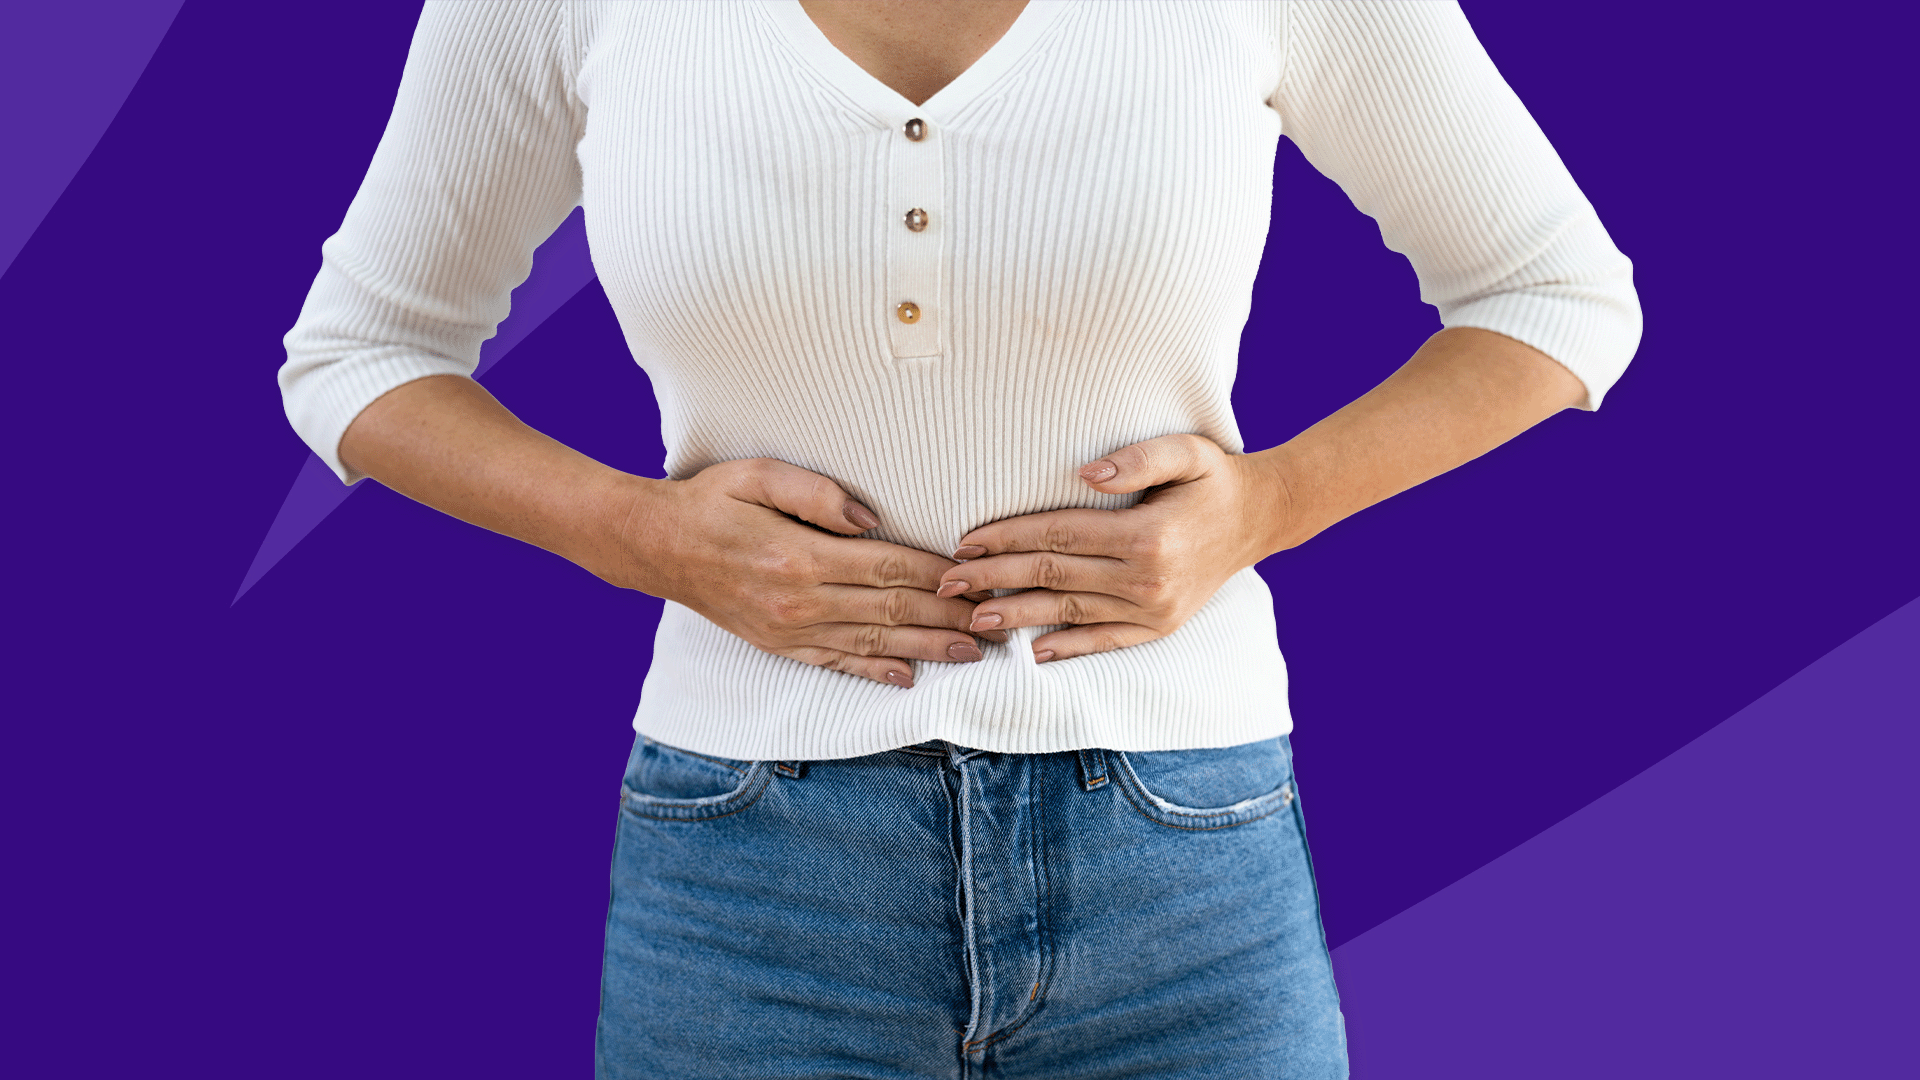 Person holding stomach: Does diverticulitis go away?